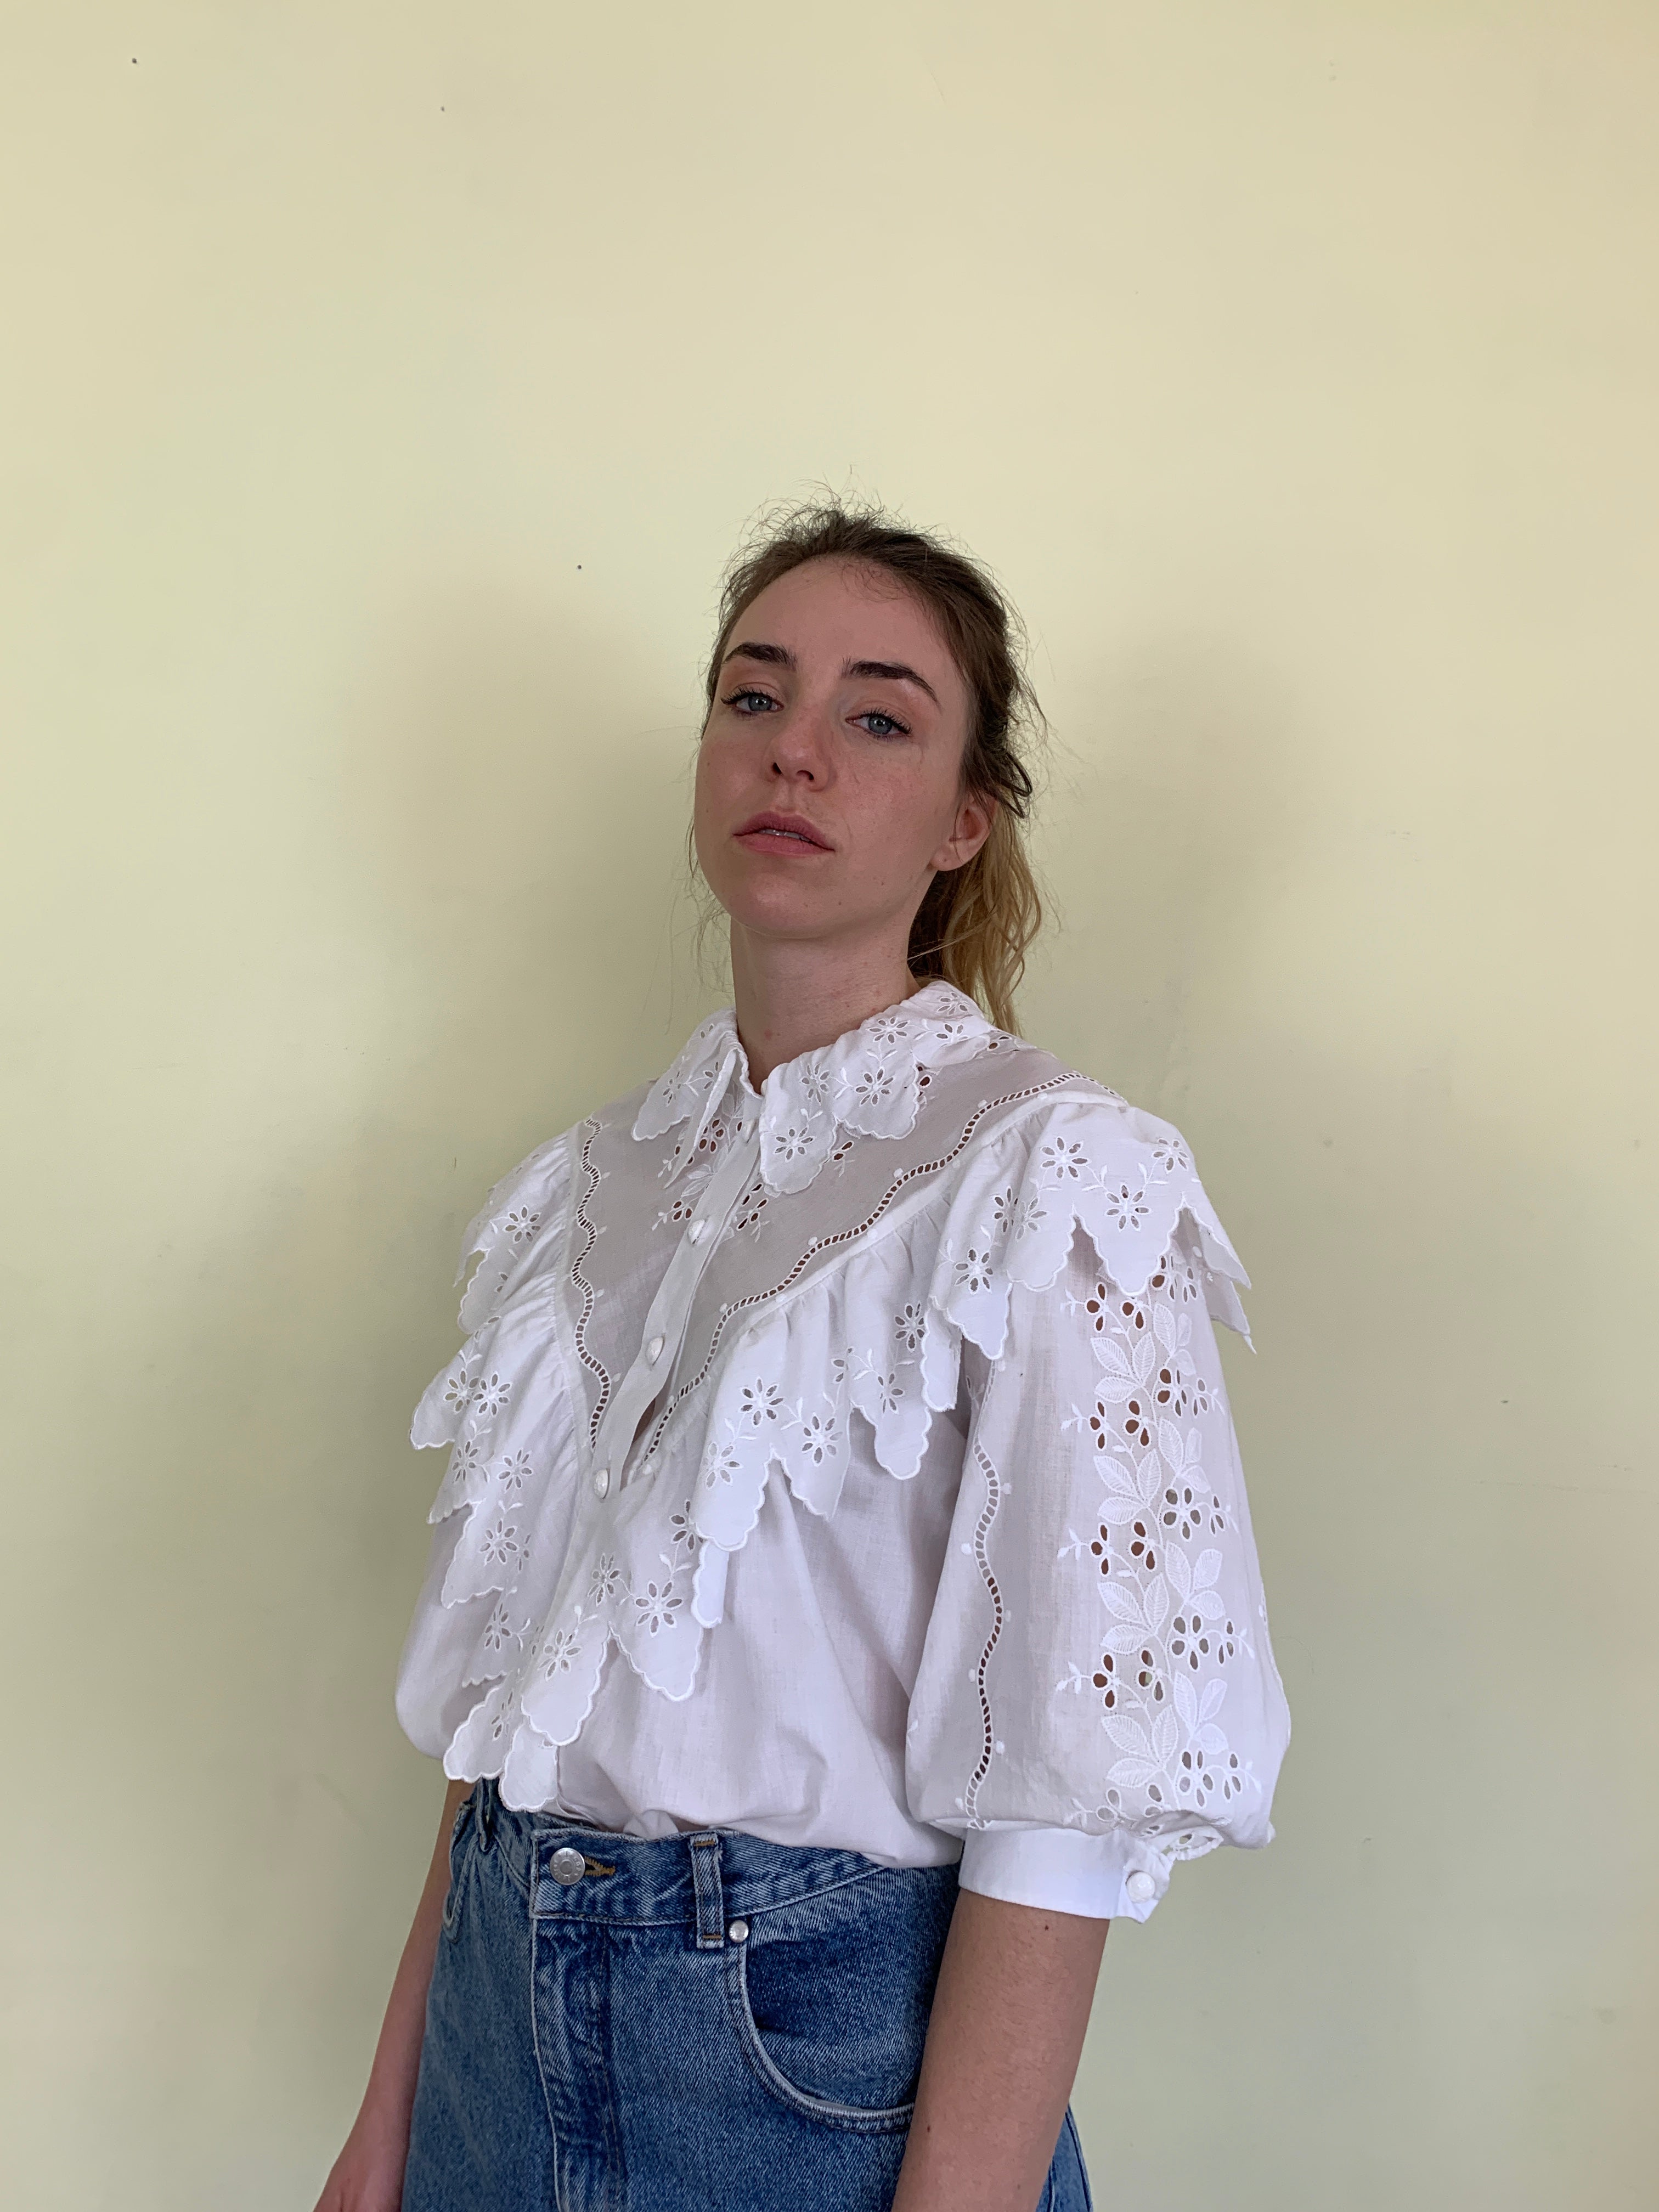 Incredible Vintage cotton broderie ruffle blouse